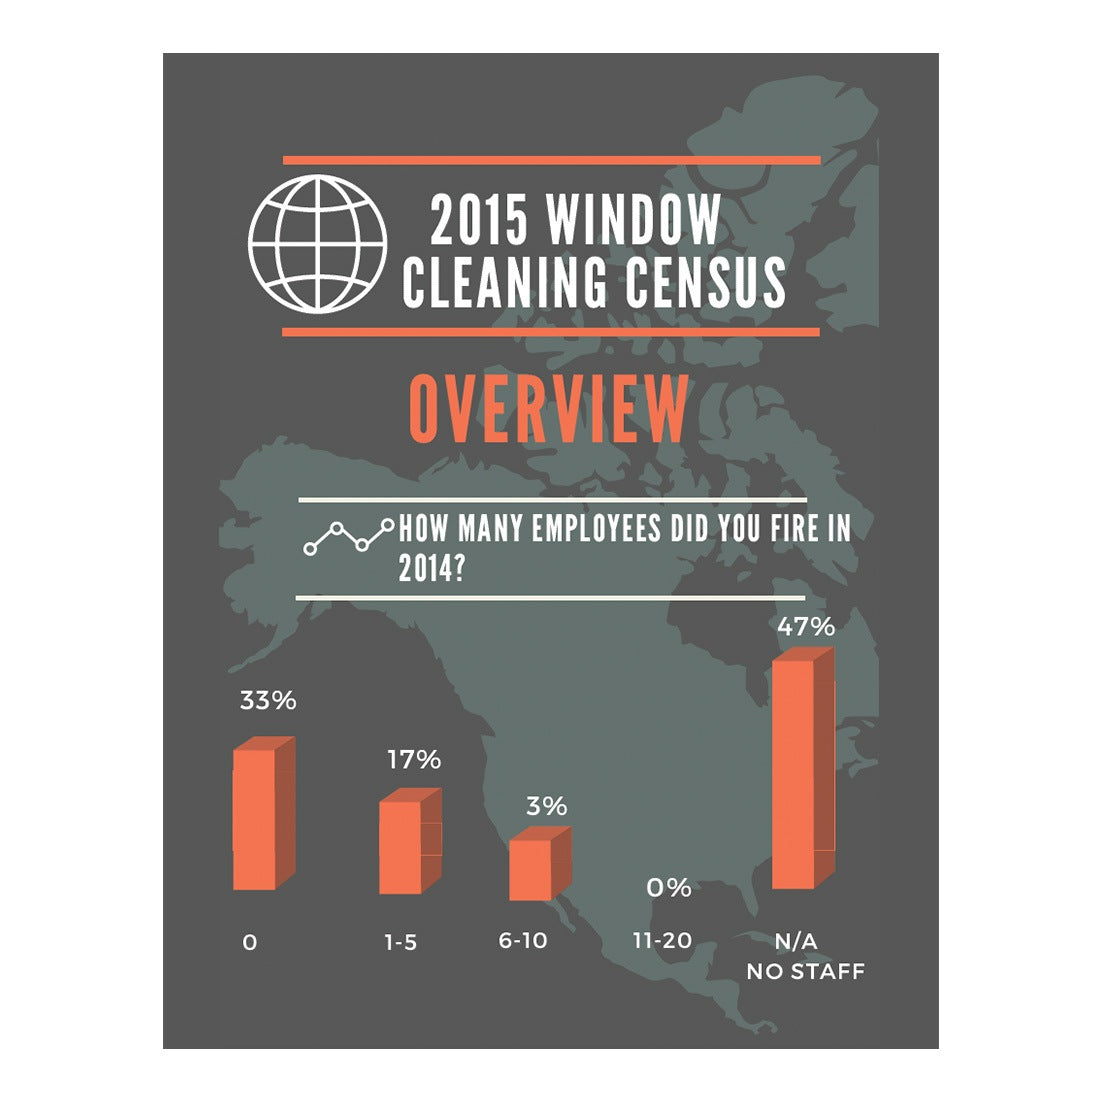 2015 Window Cleaning Census Overview